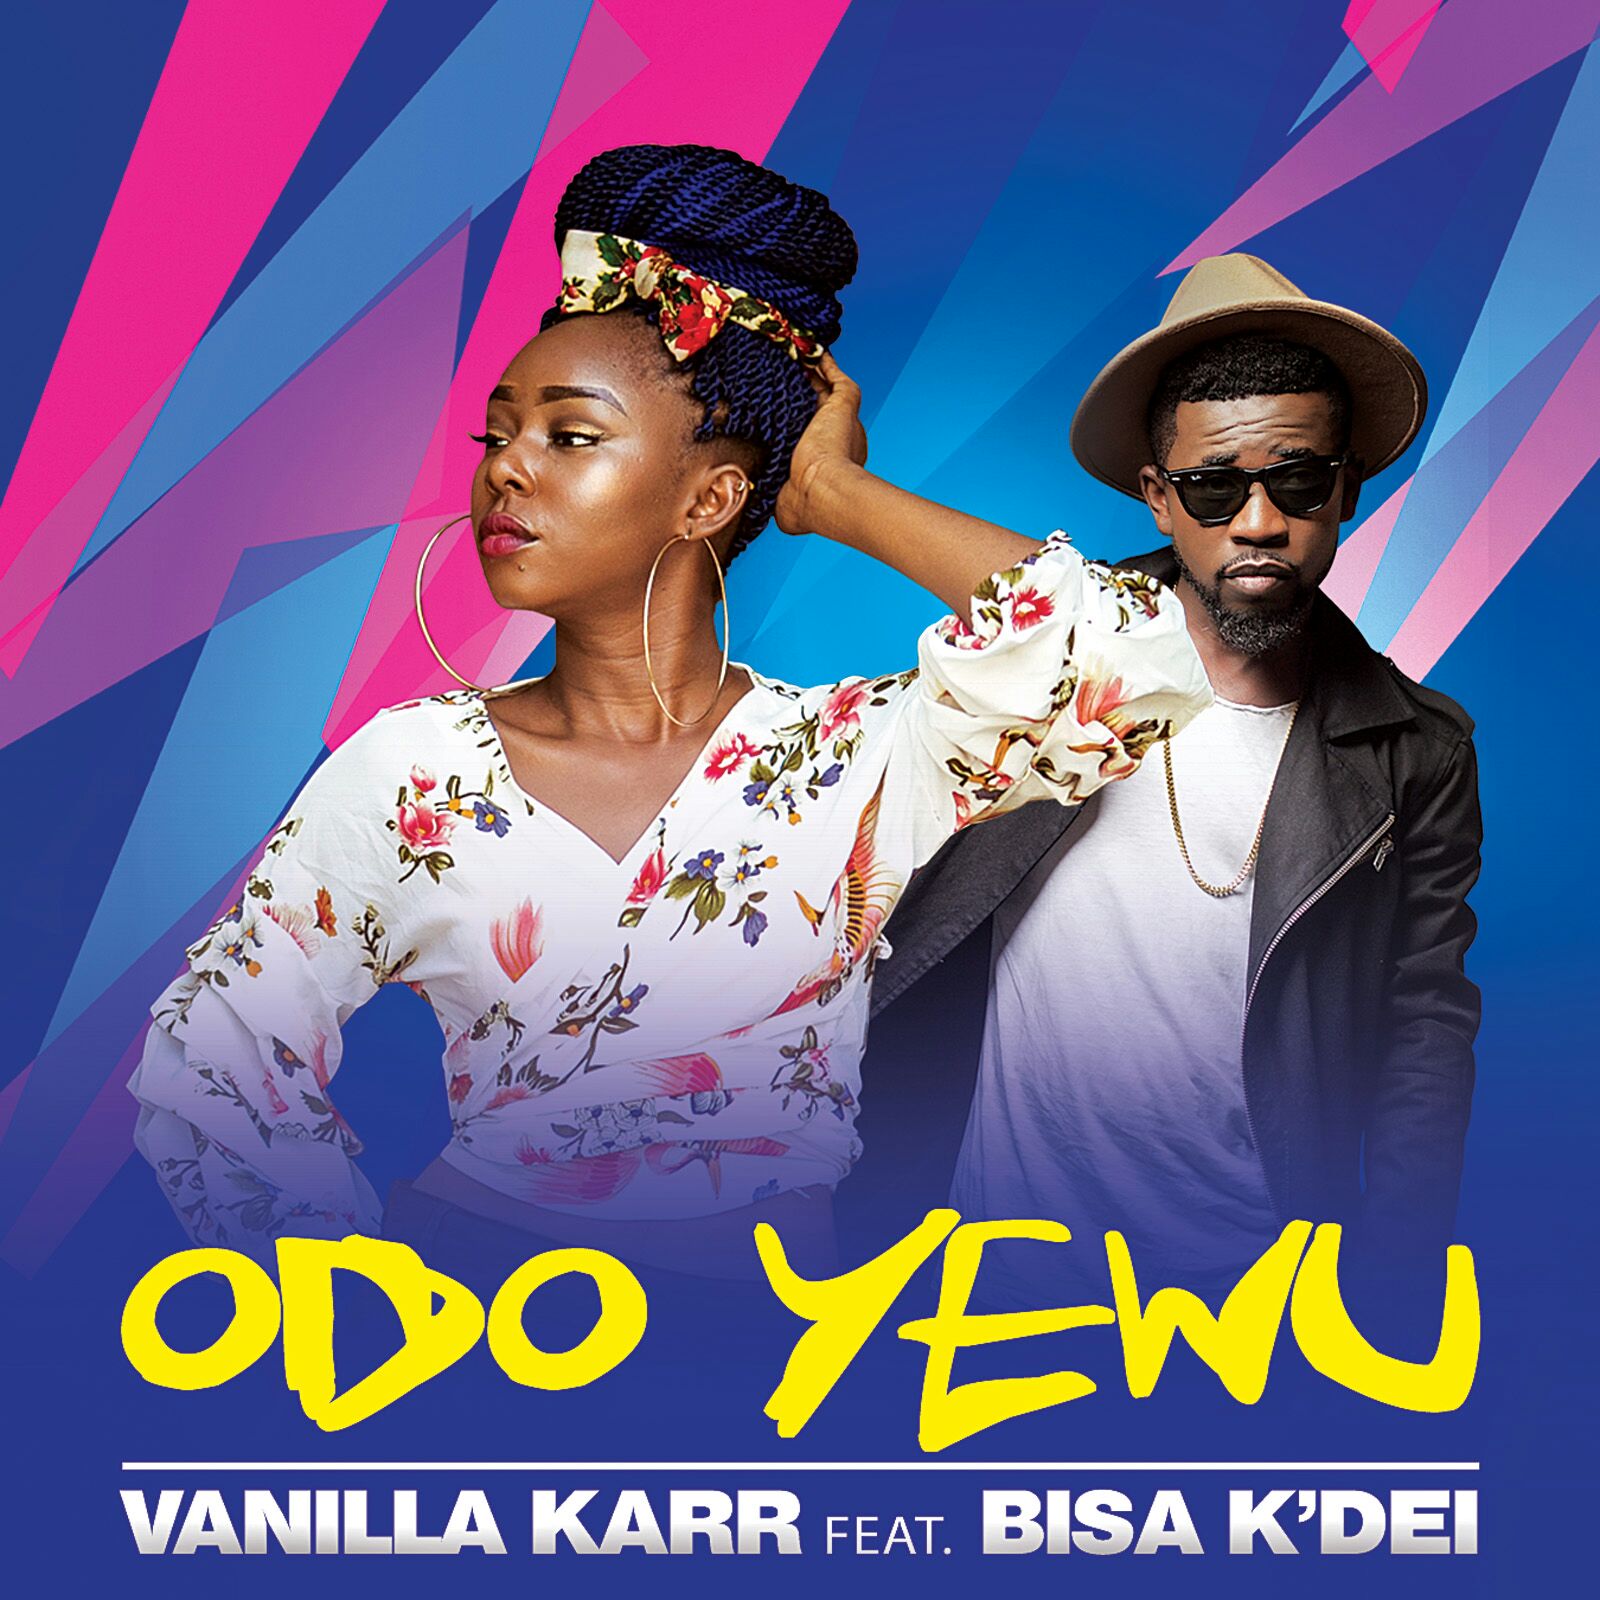 Video/Audio: Singer Vanilla Karr Enlists Bisa Kdei For New Joint ‘Odo Yewu